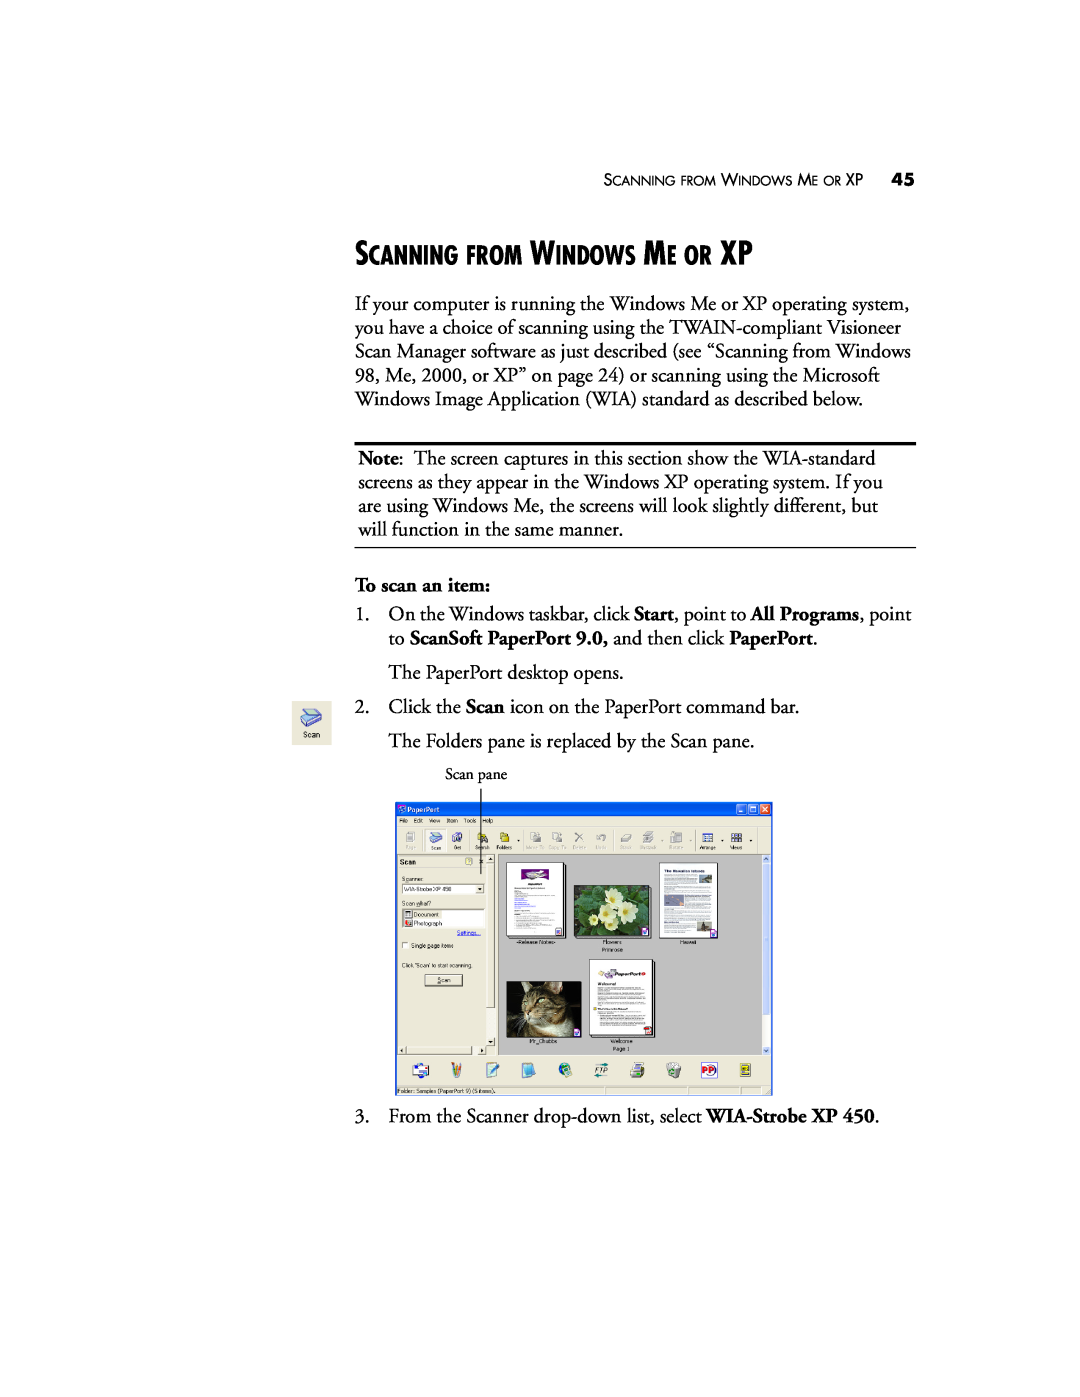 Visioneer XP 450 manual Scanning From Windows Me Or Xp, To scan an item 